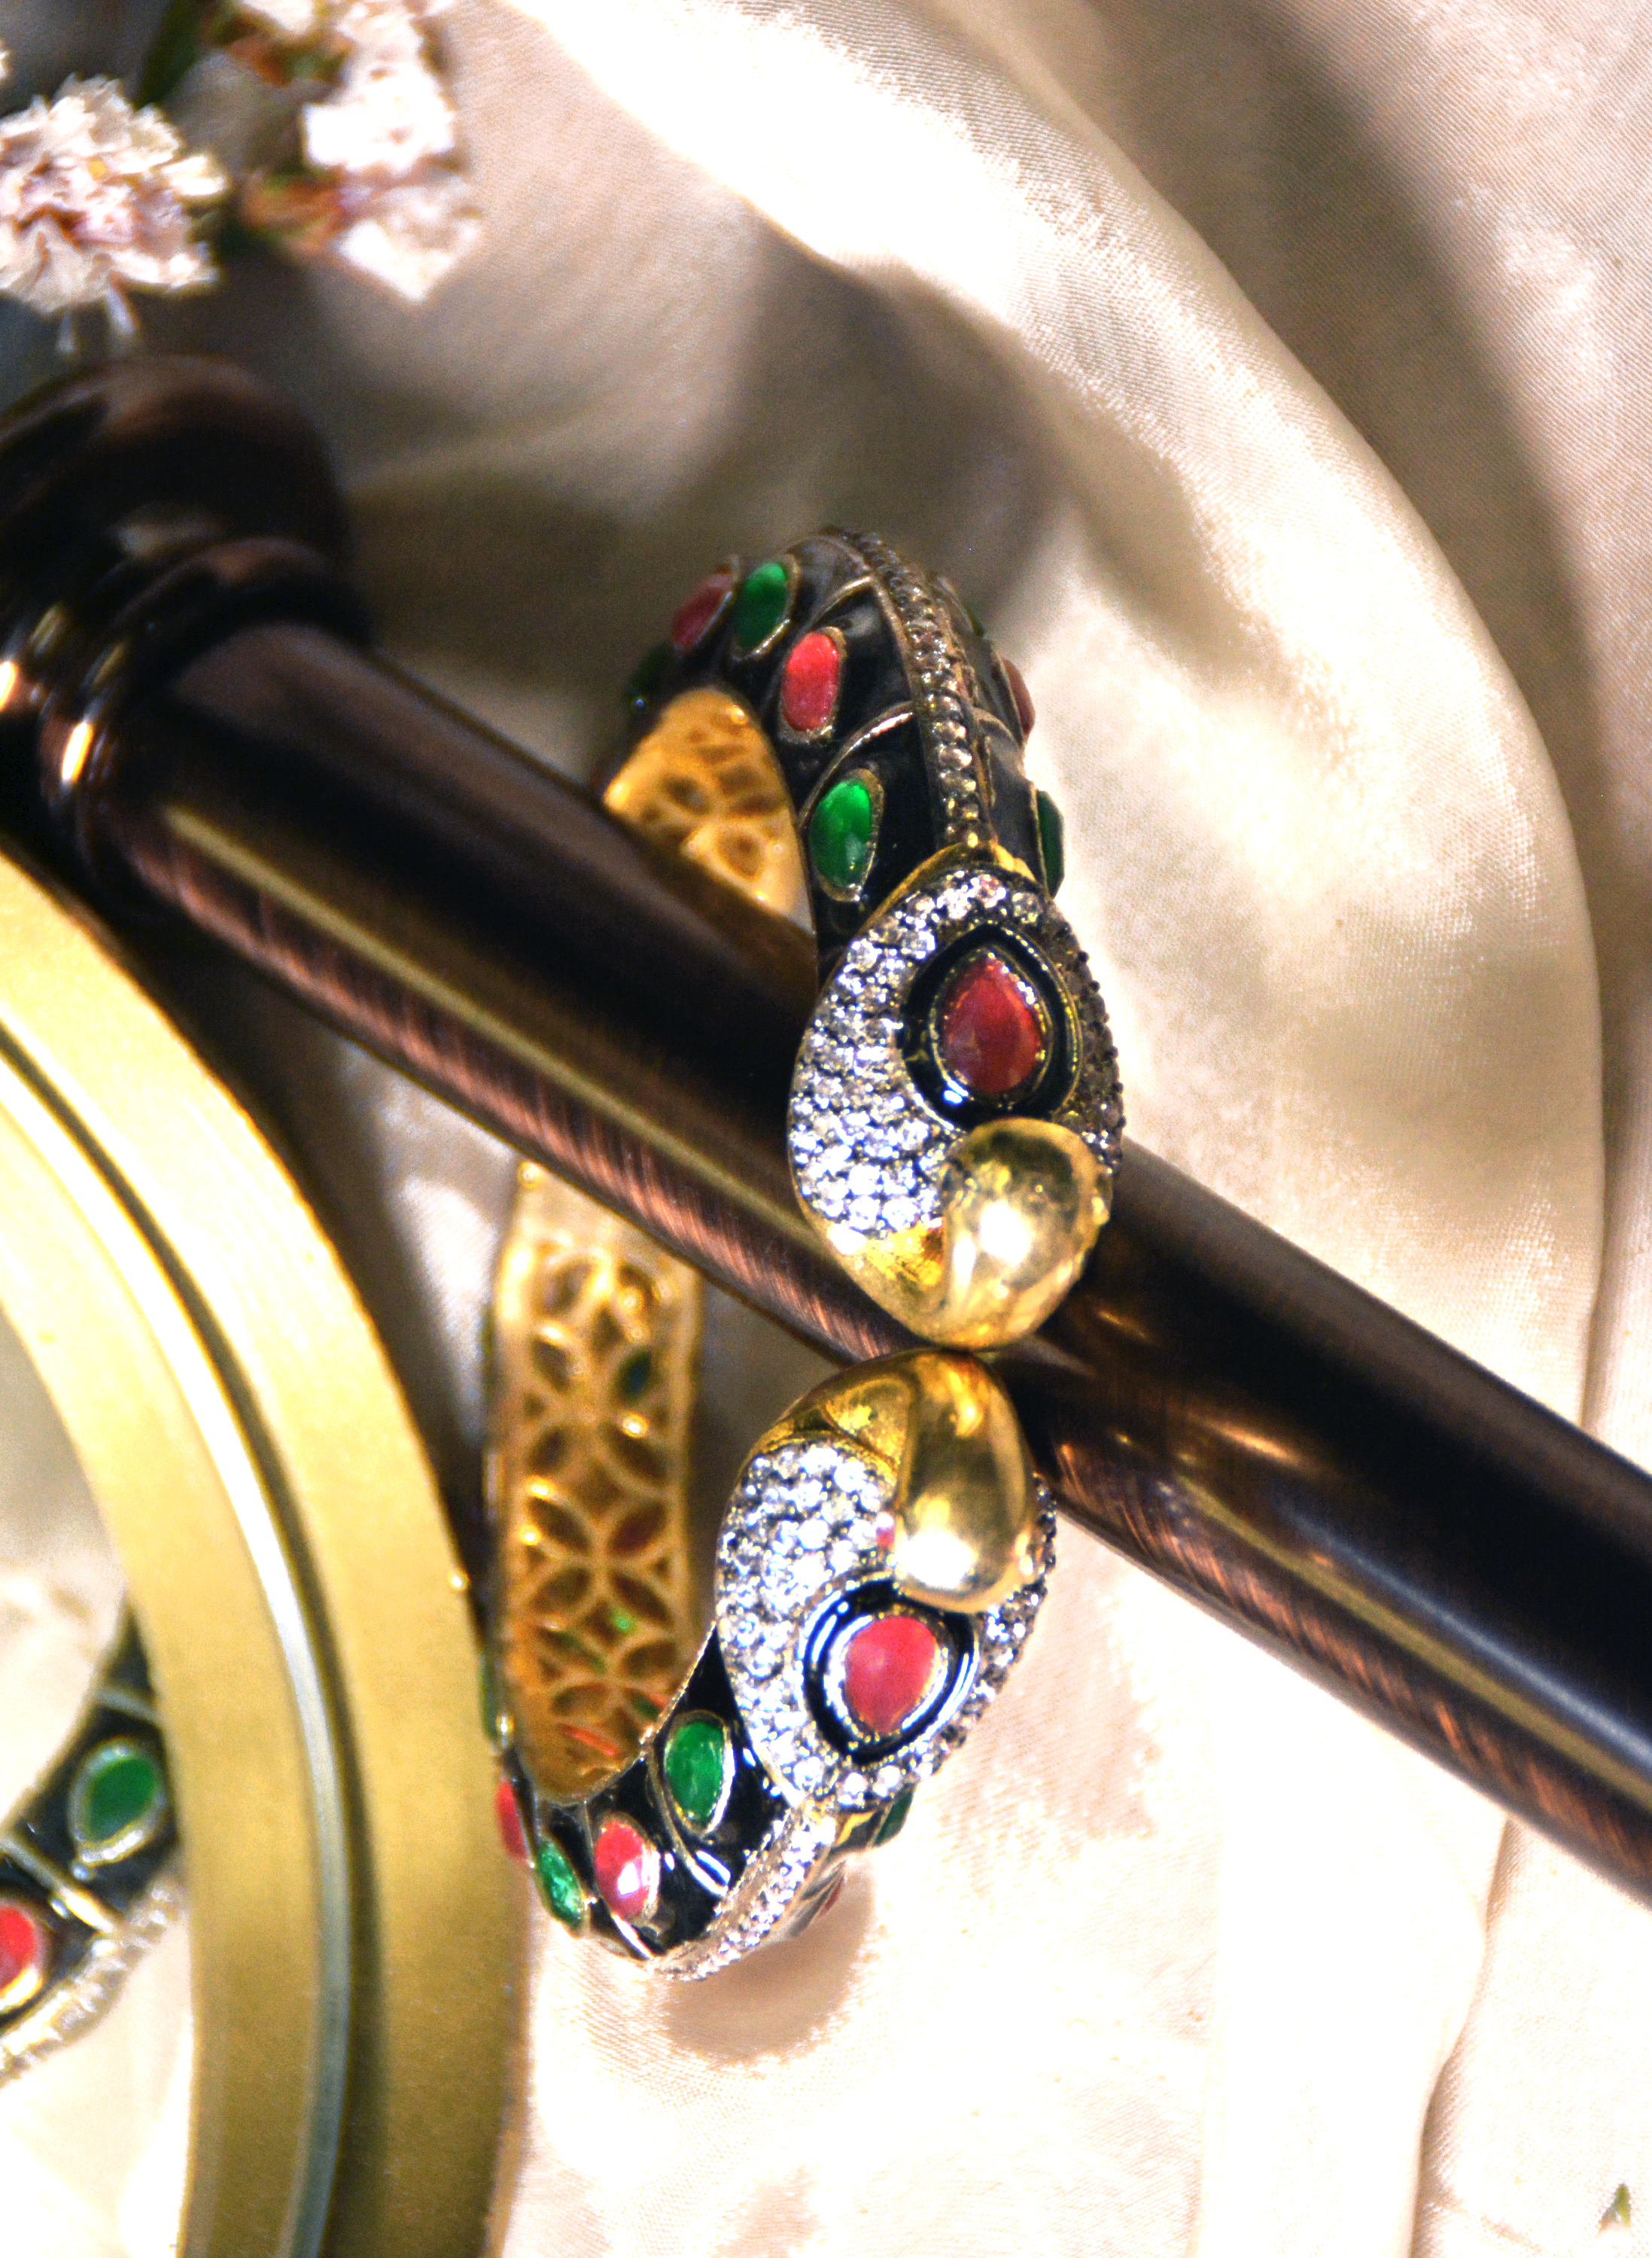 Ruby & Emerald Cuff Bracelet with Swan studded ends